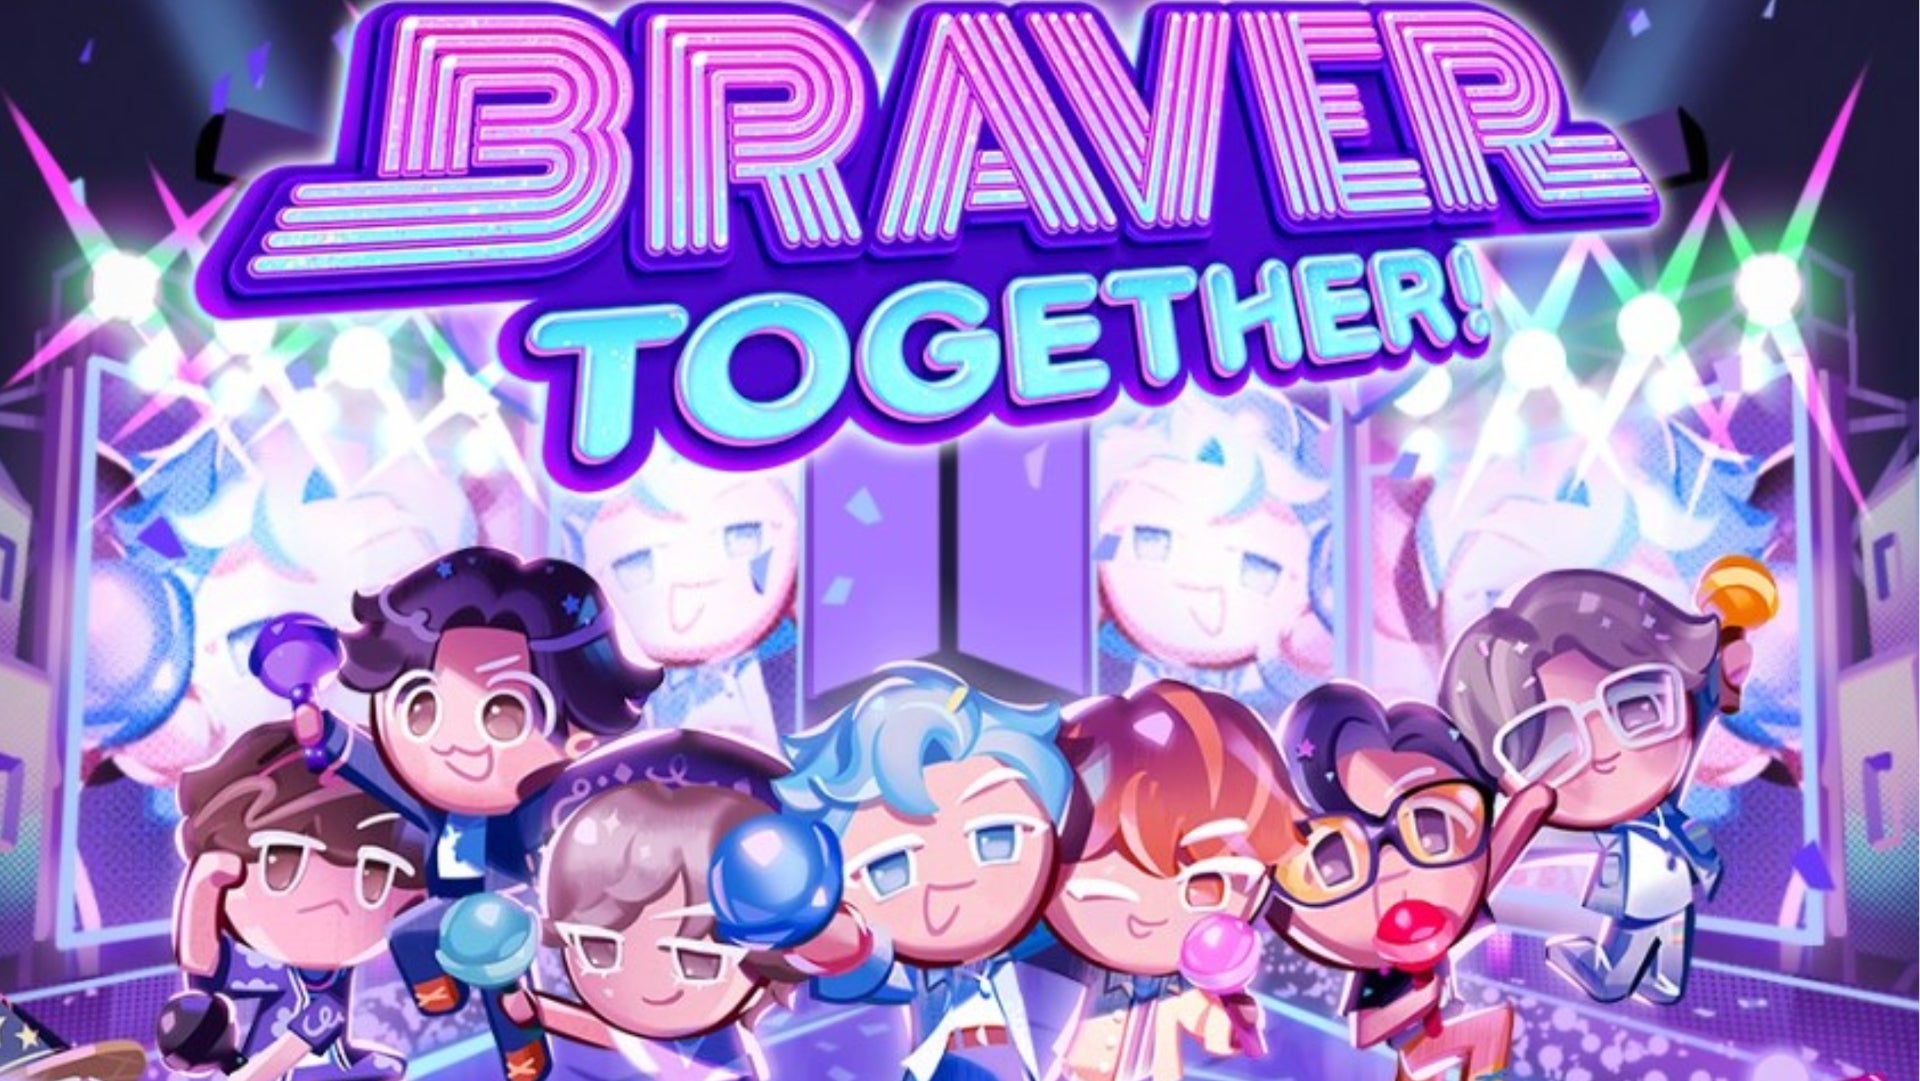 Cookie Run: Kingdom BTS Braver Together event promo art featuring all seven members of BTS on stage in their Cookie forms.